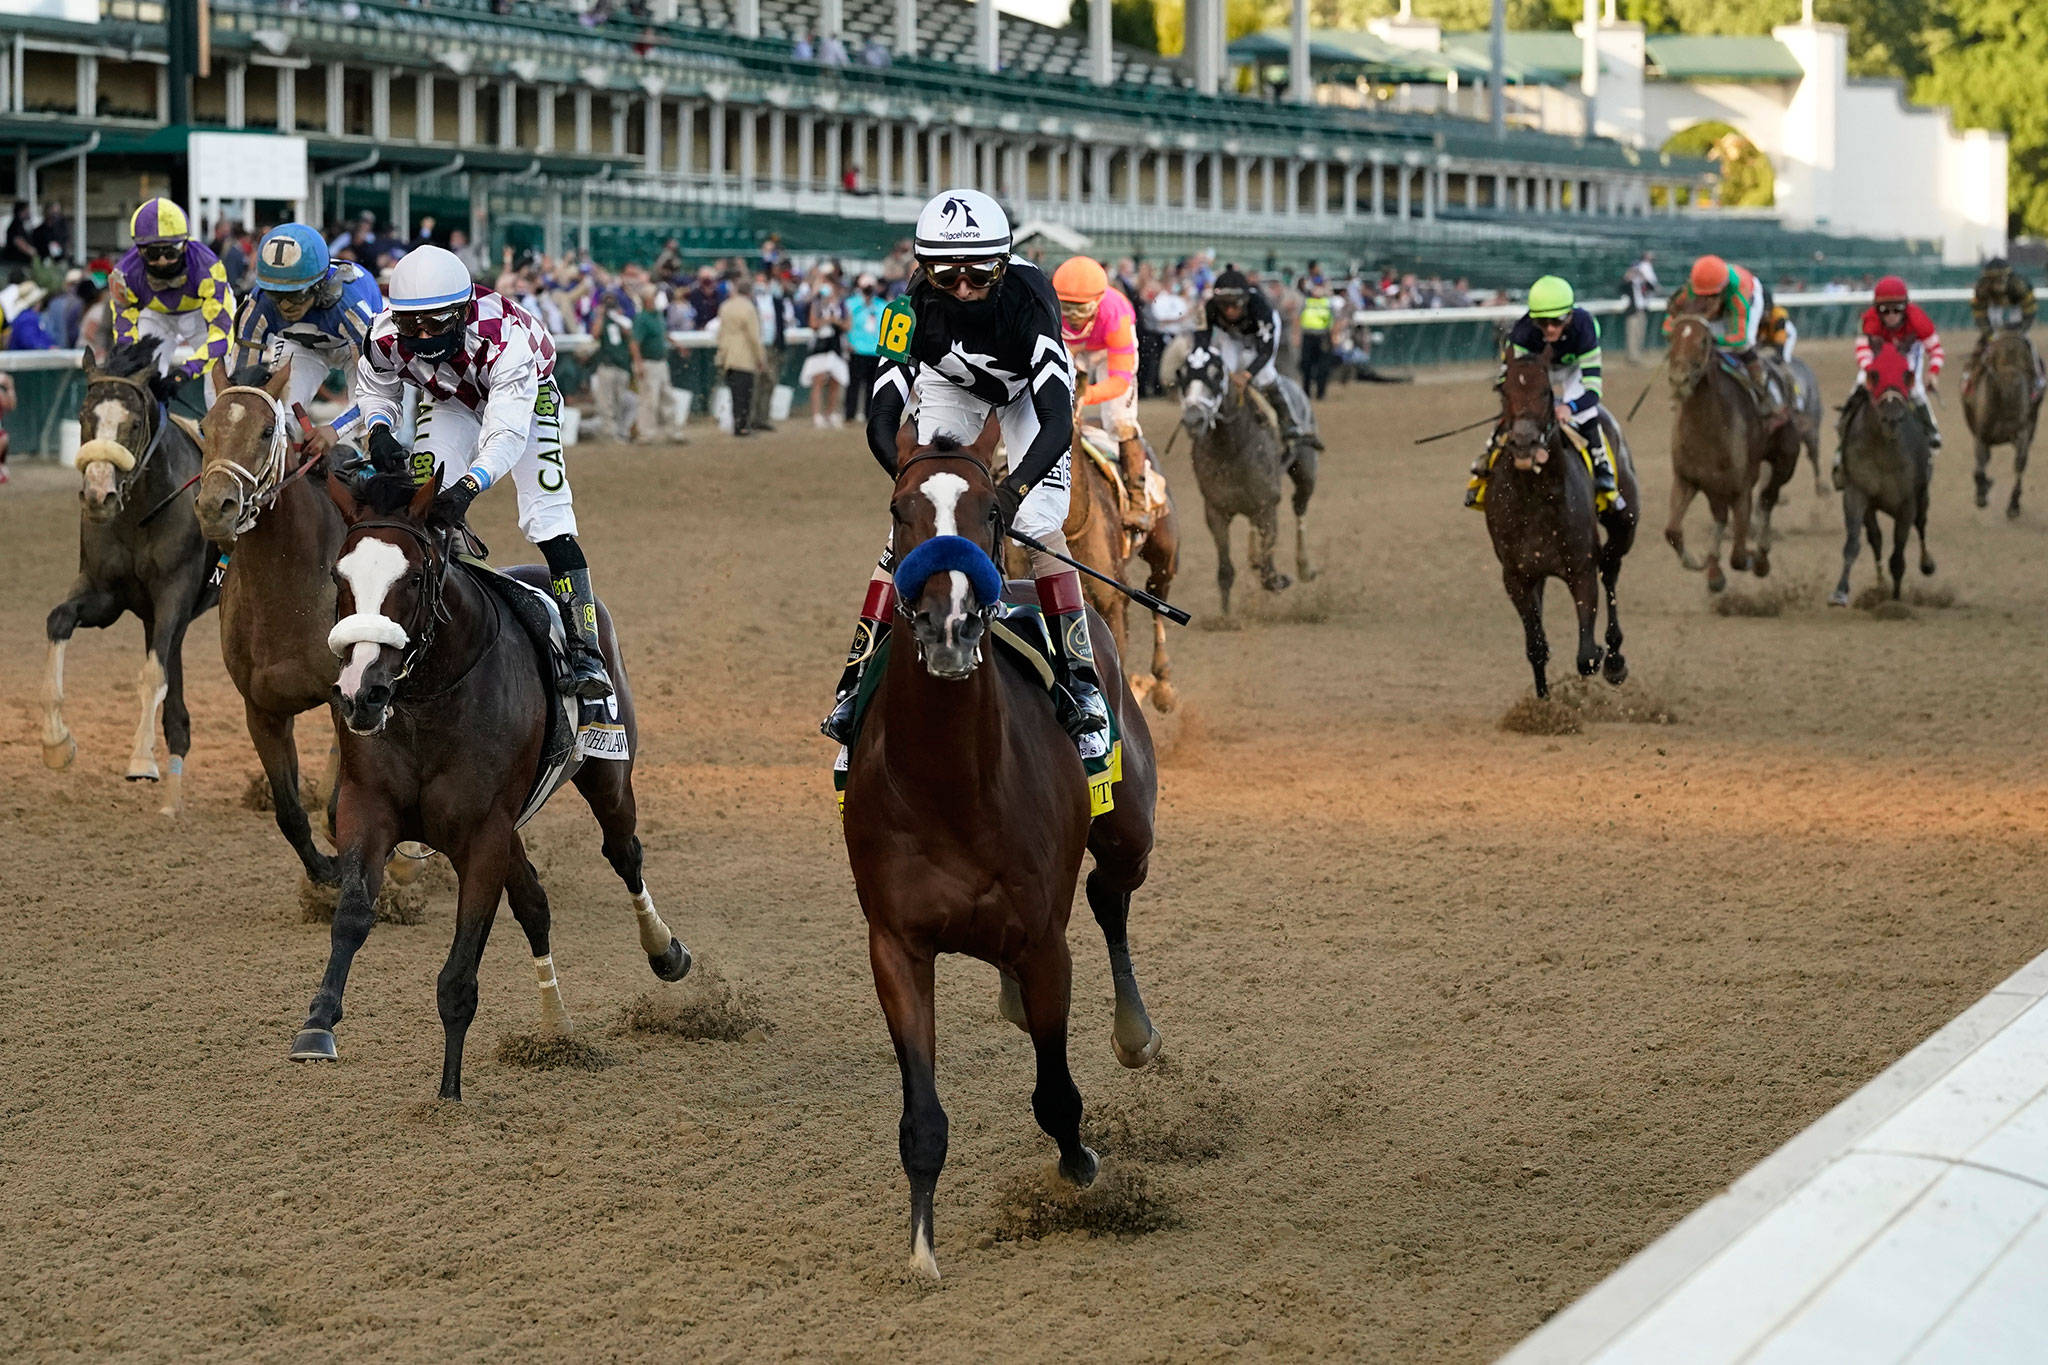 Jockey John Velazquez riding Authentic (18) crosses the finish line to win the 146th running of the Kentucky Derby on Saturday at Churchill Downs in Louisville, Ky. (AP Photo/Jeff Roberson)